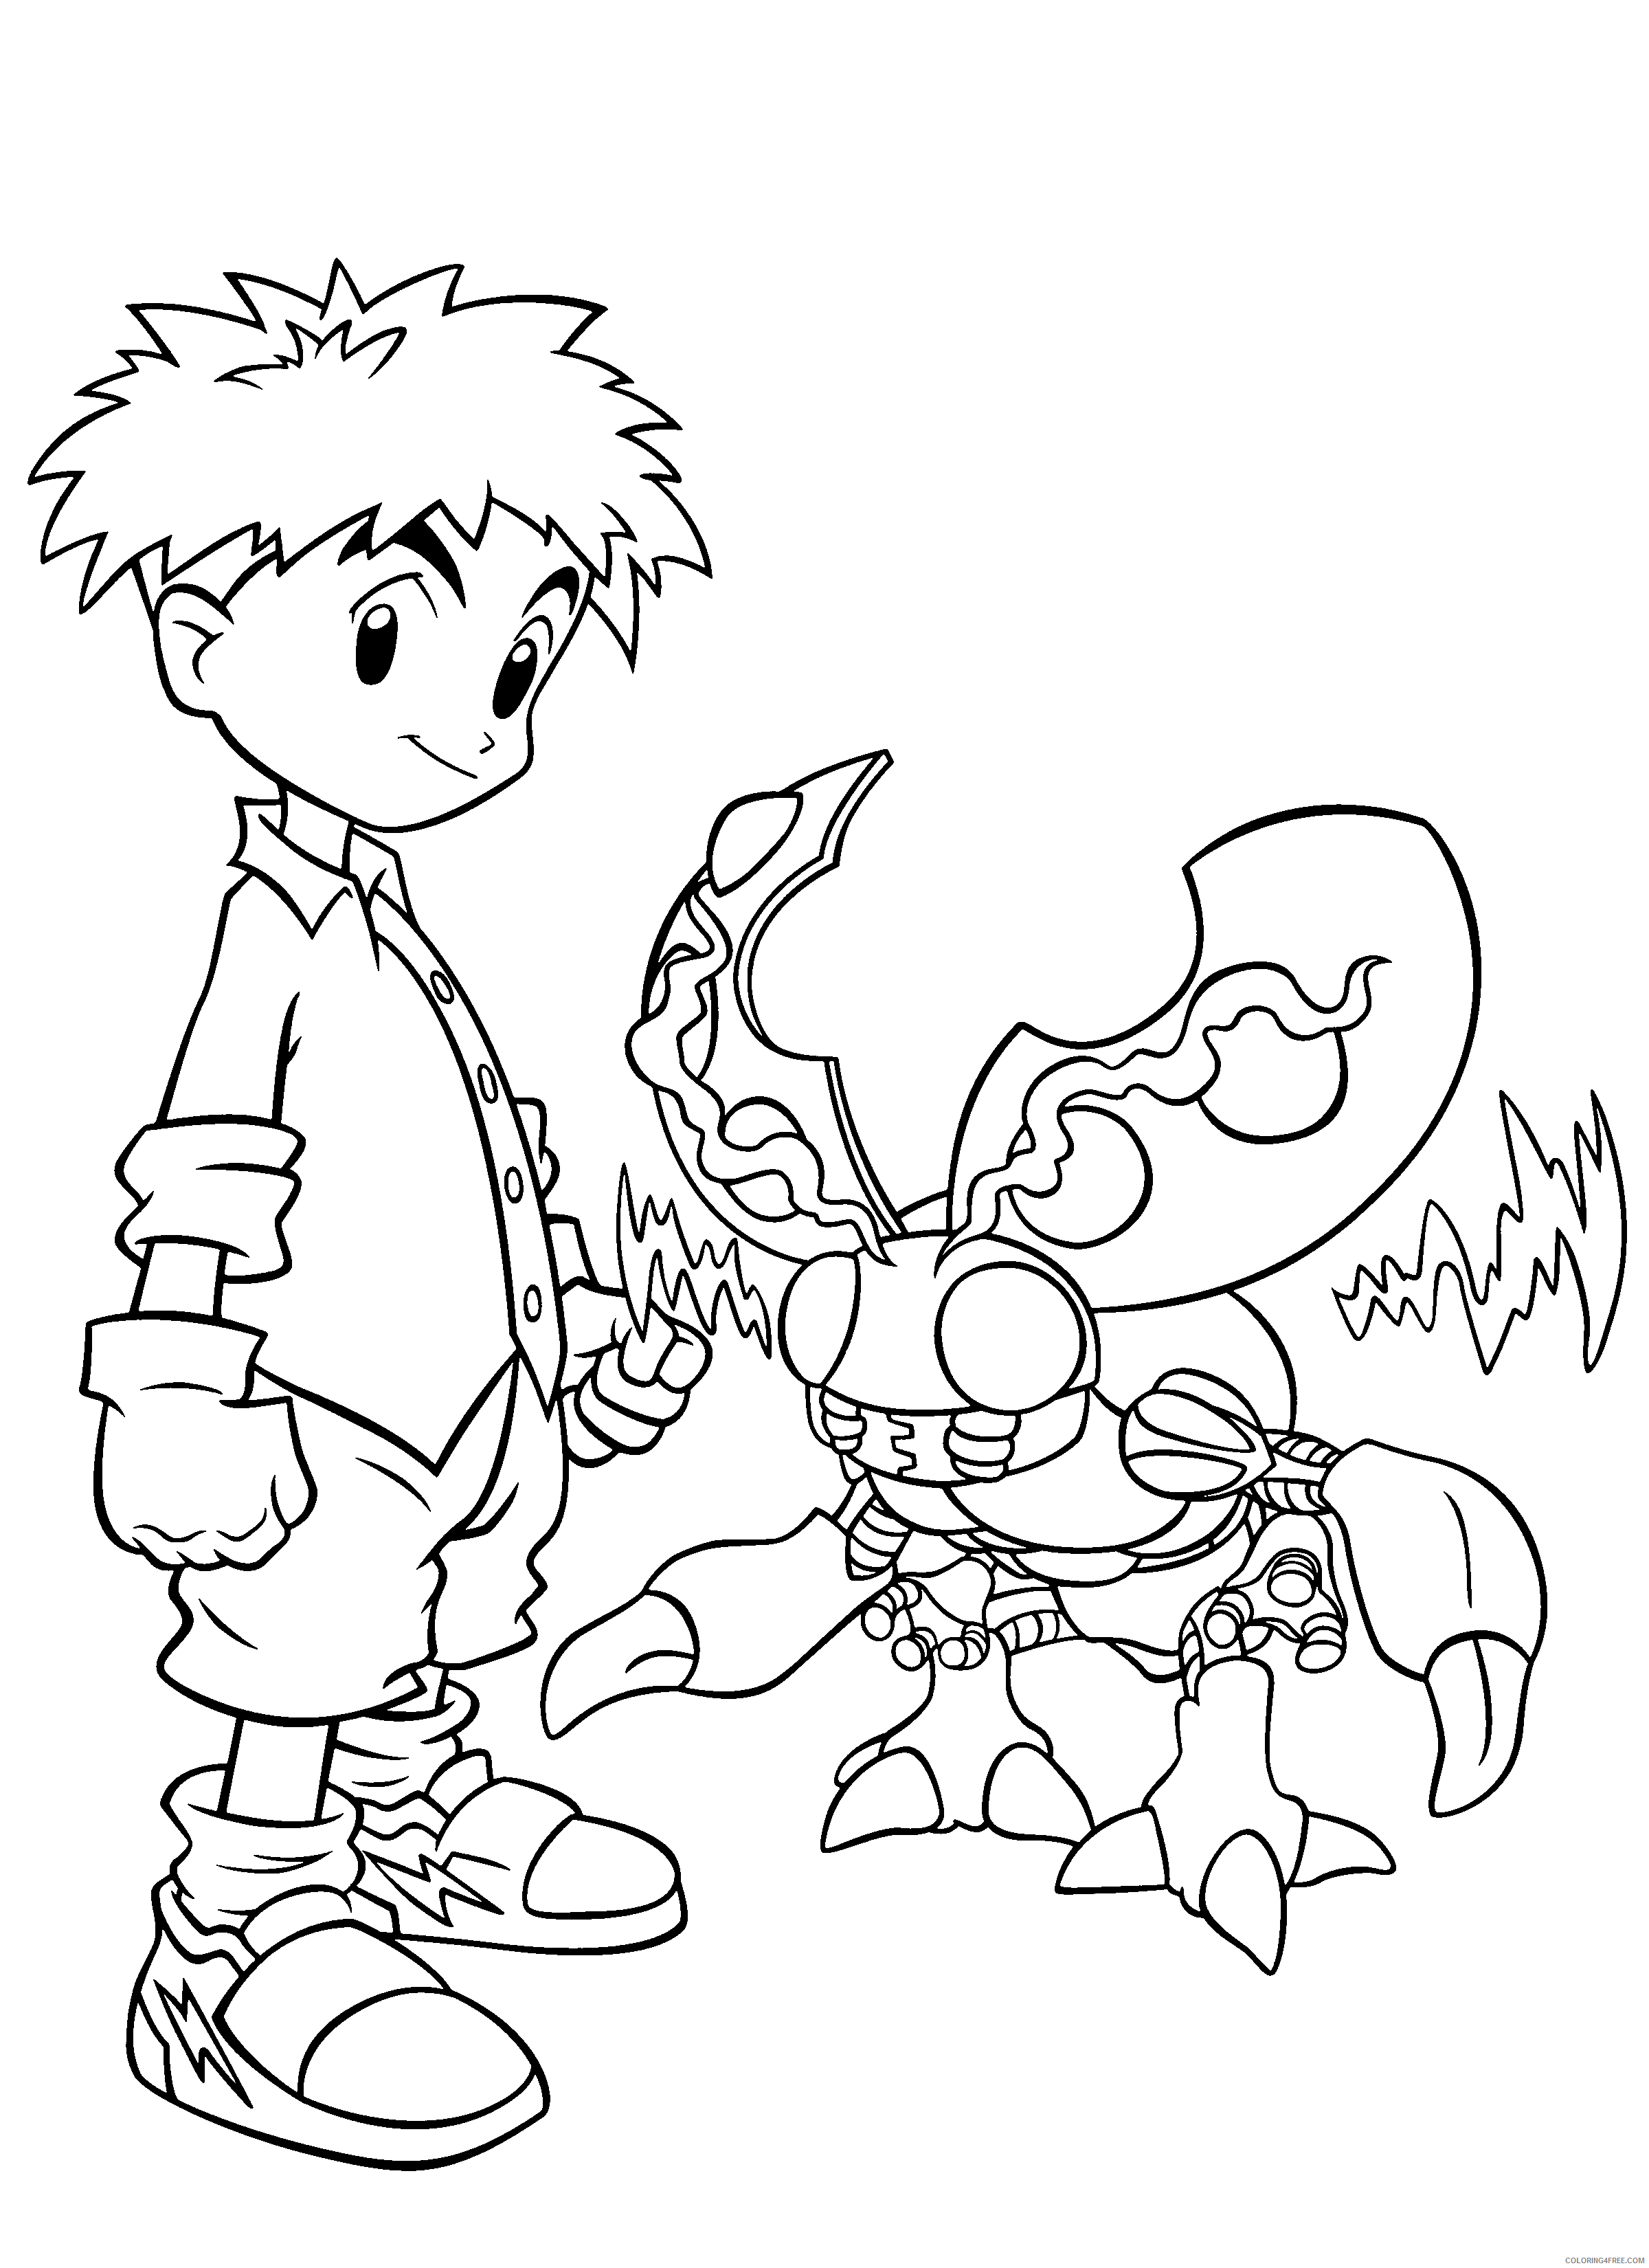 Digimon Printable Coloring Pages Anime Digimon For Kids 2021 0397 Coloring4free